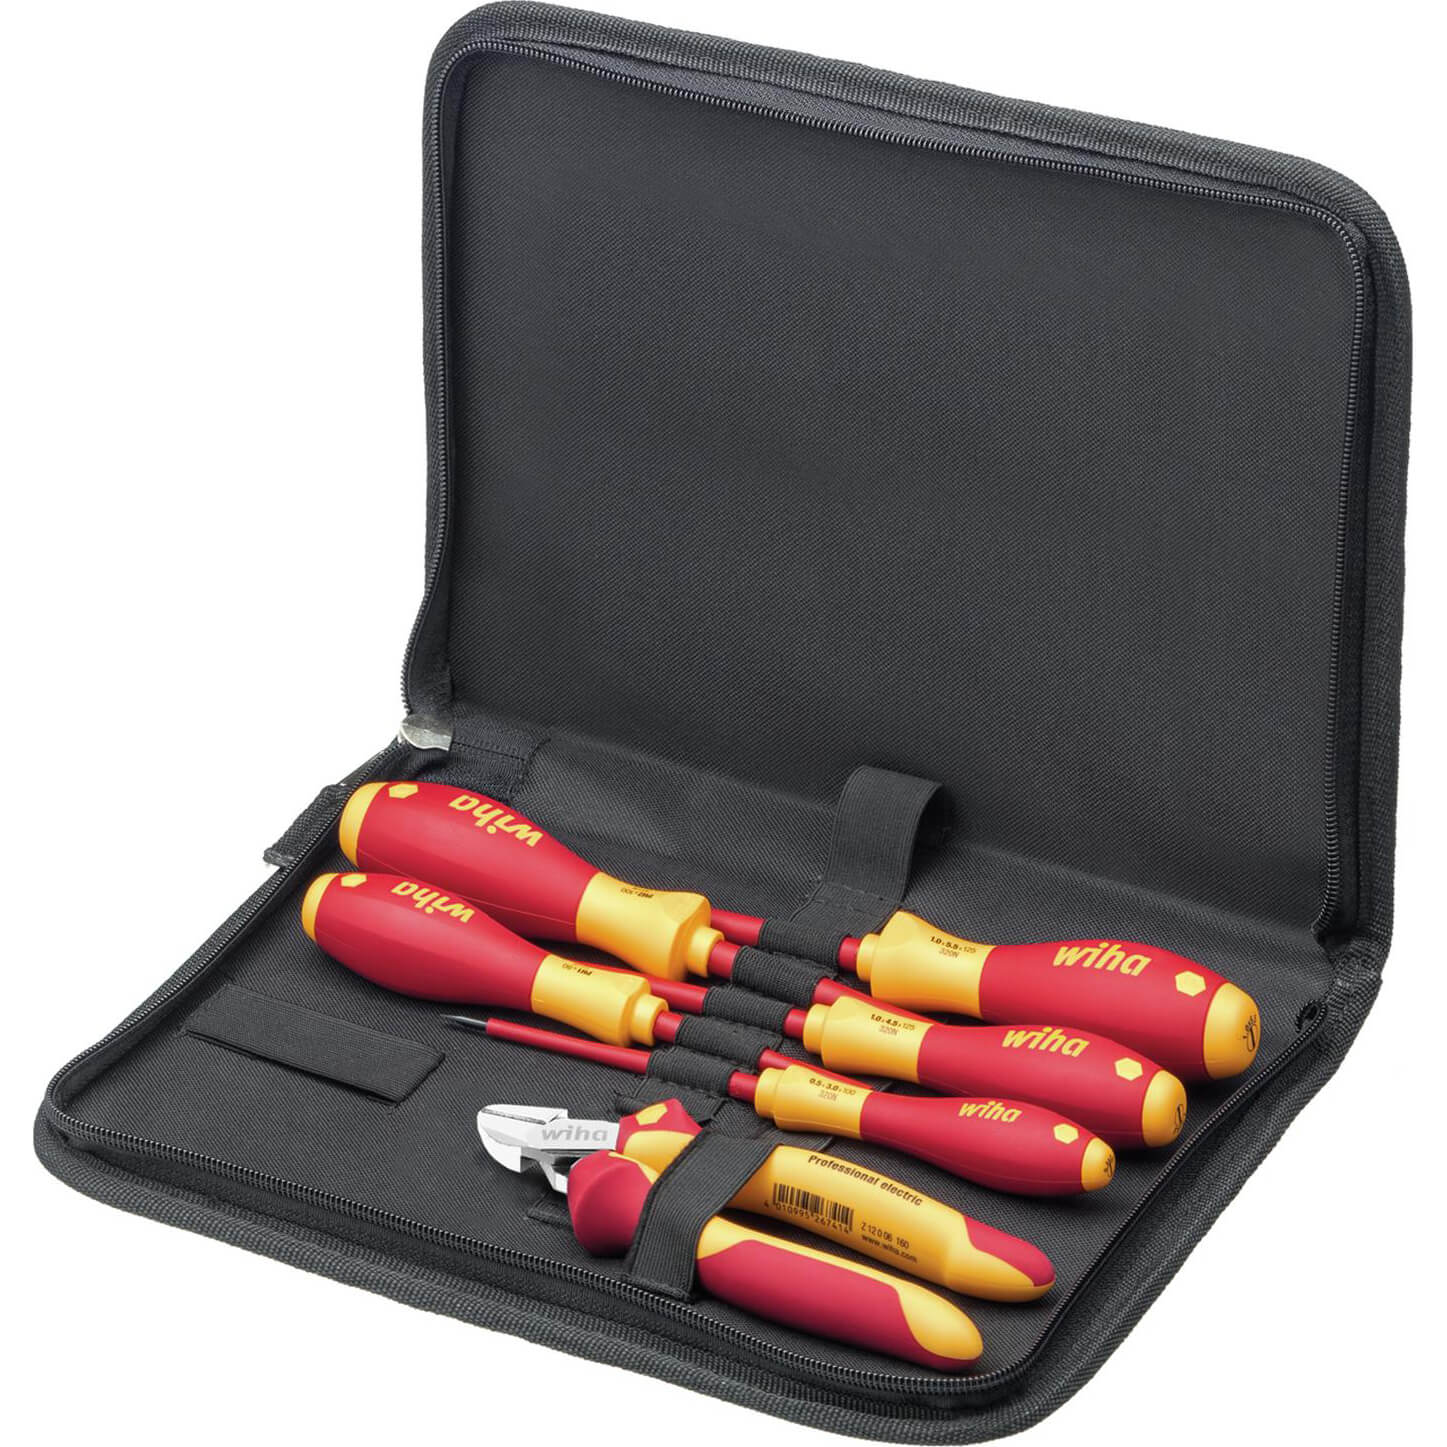 Wiha 6 piece VDE Insulated Screwdriver and Side Cutters Tool Kit